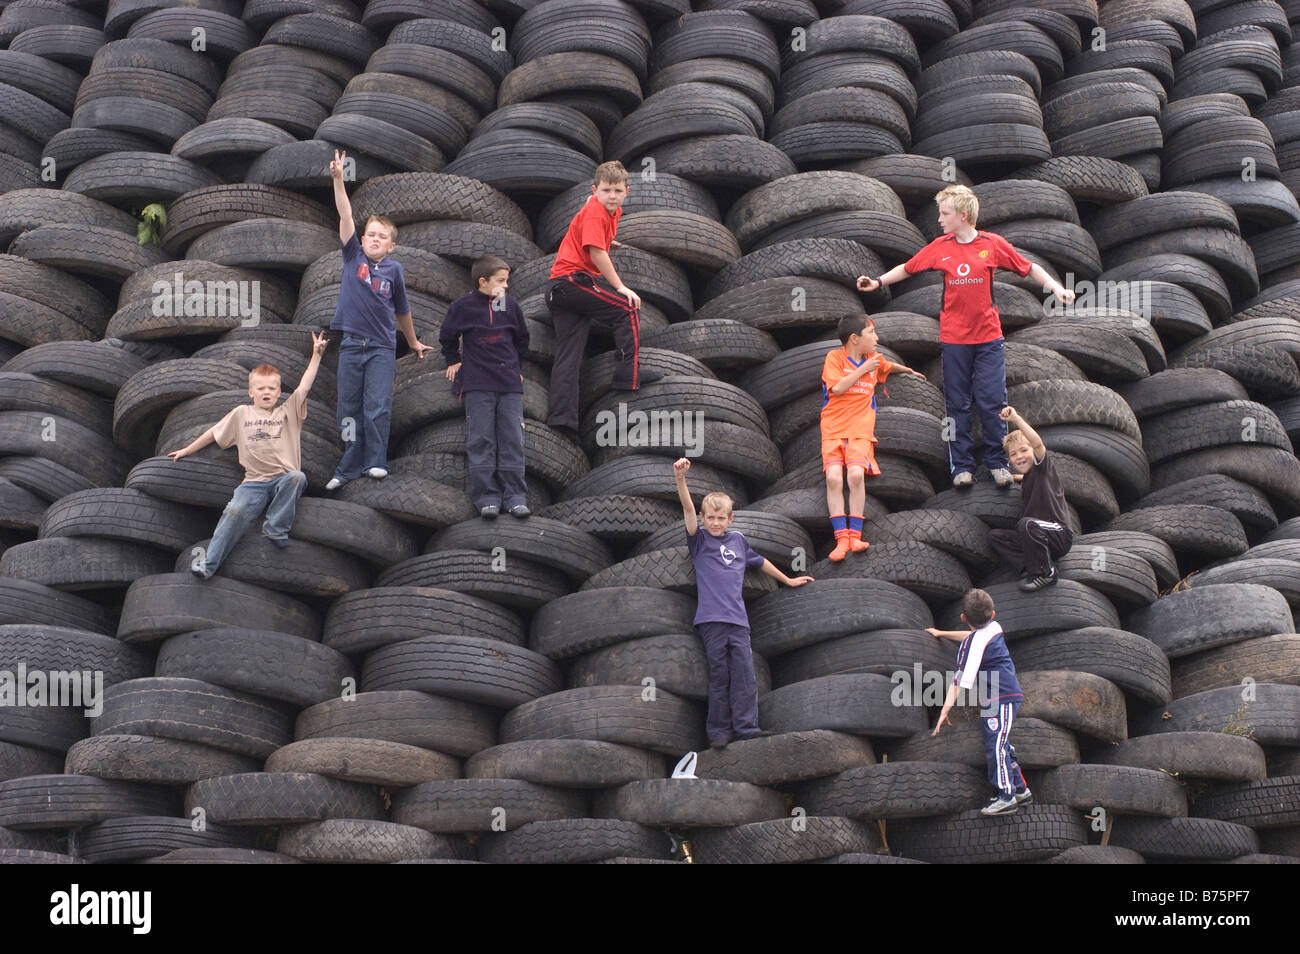 Boys playing on 12th July bonfire made almost entirely of tyres Lisburn Northern Ireland 2003. Stock Photo